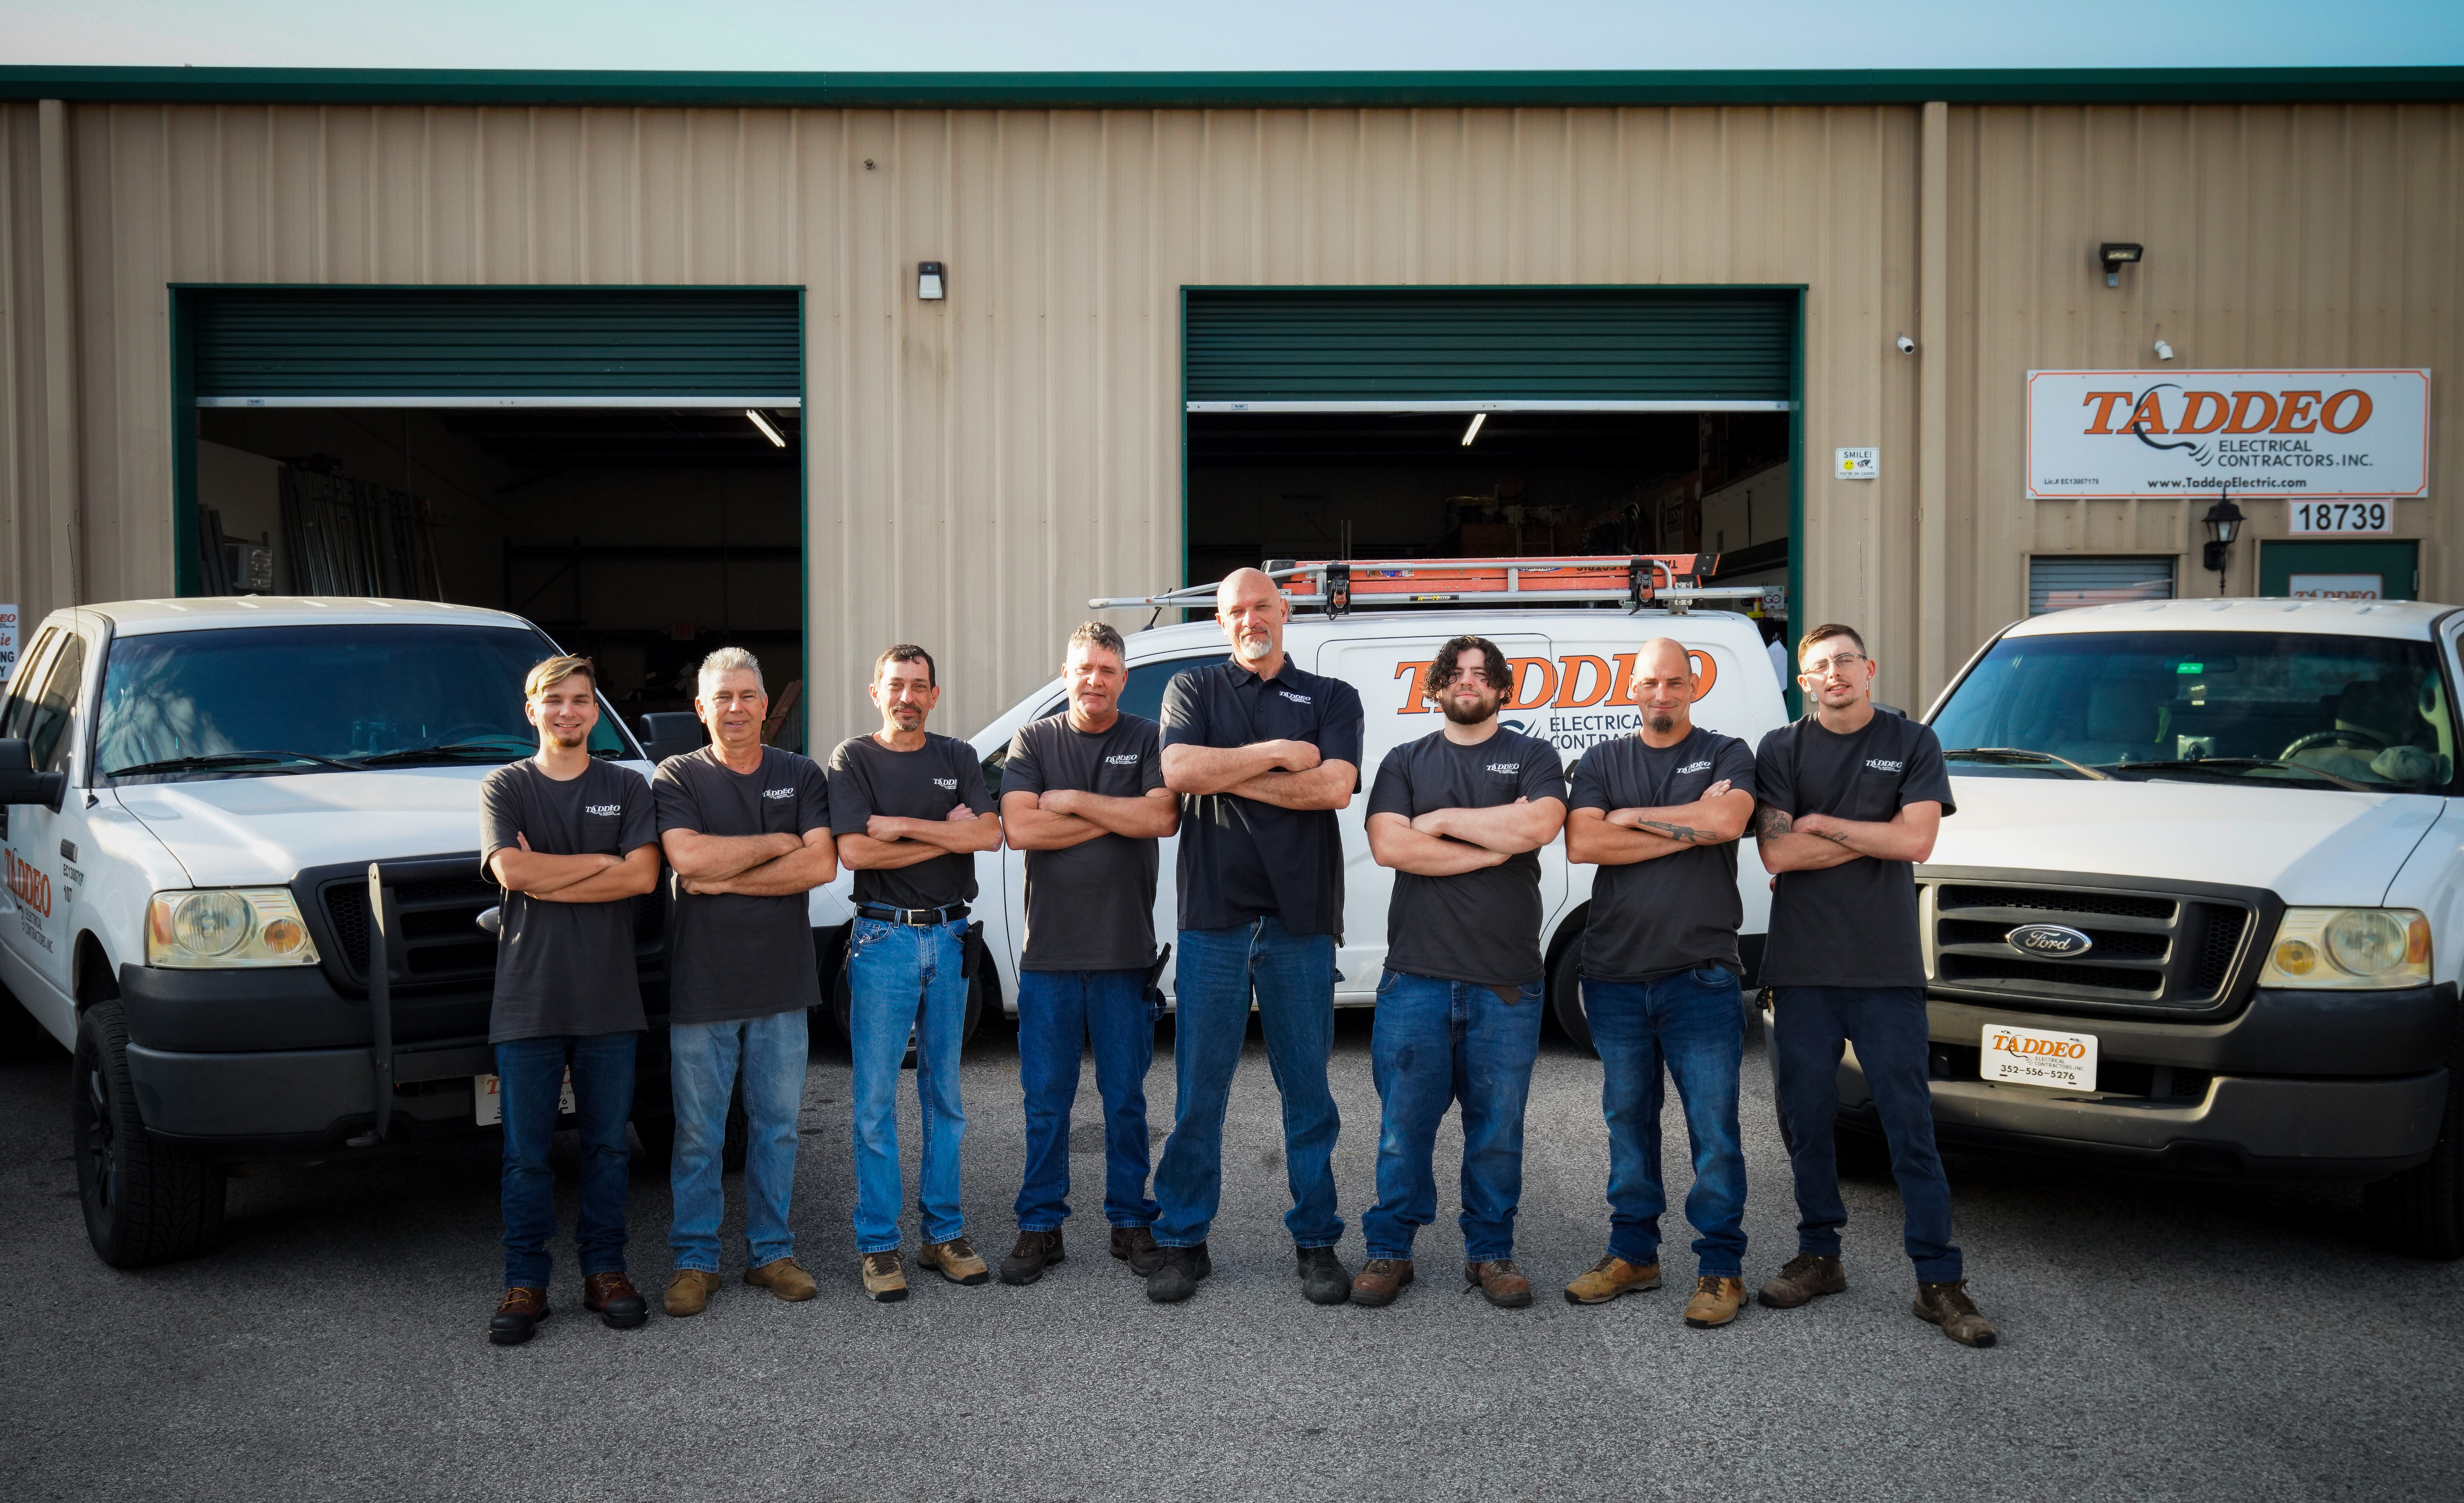 Taddeo electrician team standing in front of their service vehicles